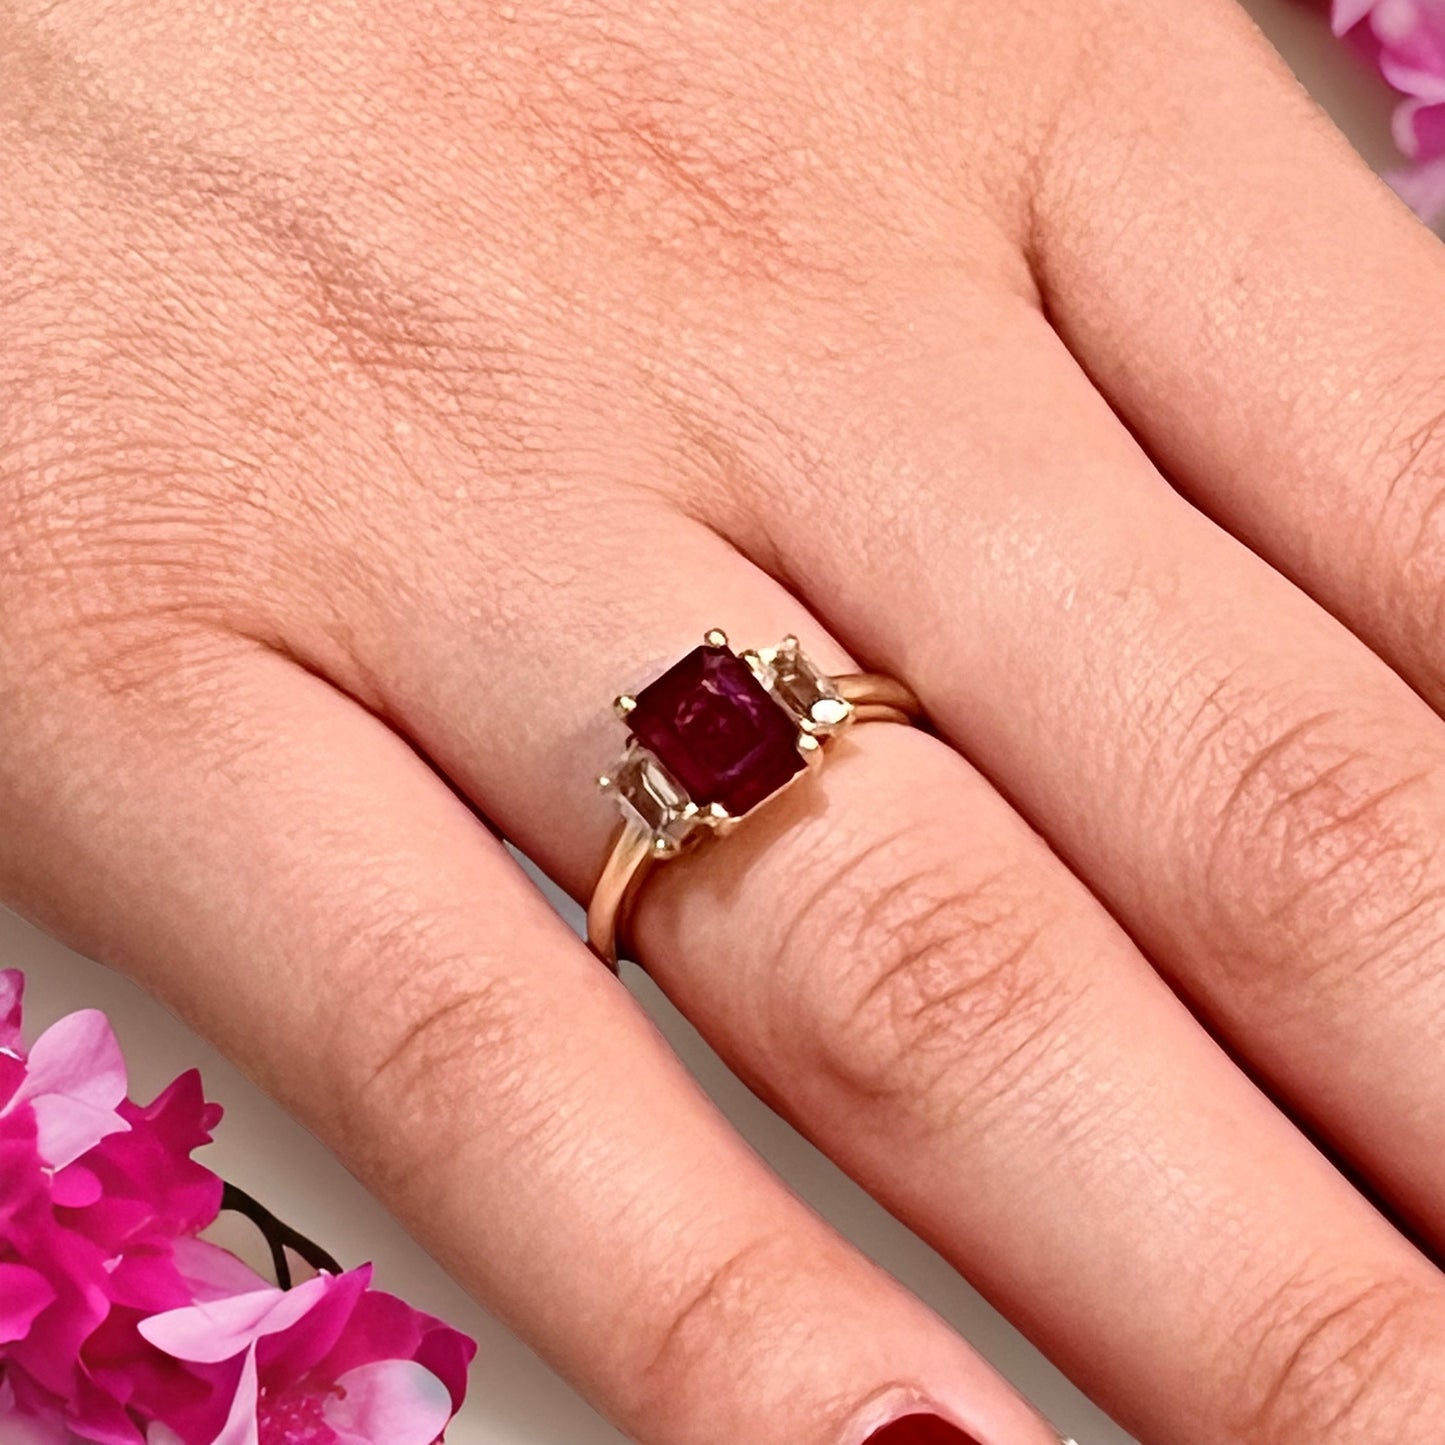 Natural Ruby Sapphire Ring 6.5 14k Y Gold 2.51 TCW Certified $3,950 310636